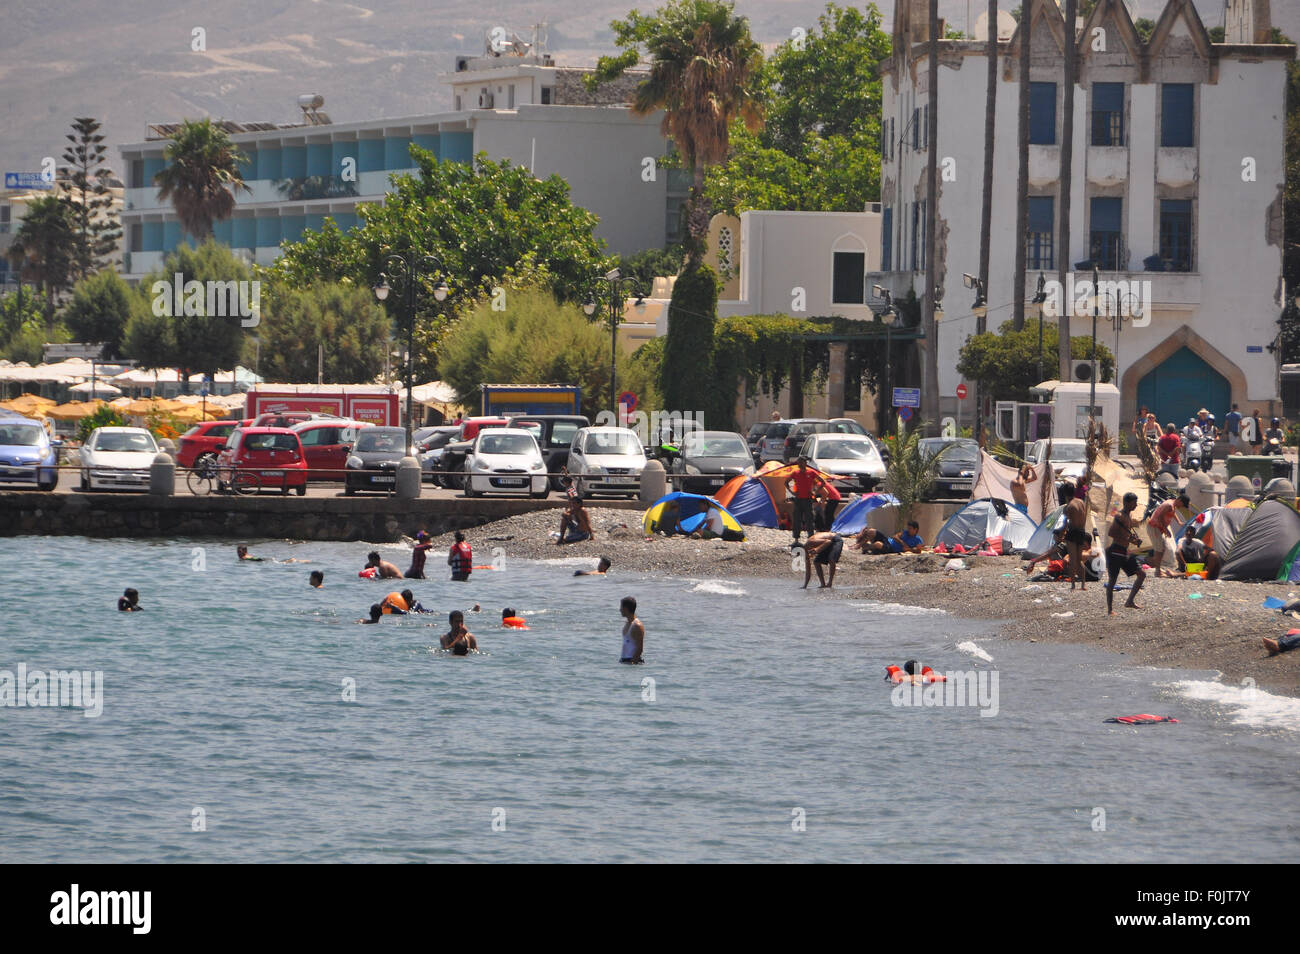 Kos, Greece. 16th Aug, 2015. Migrants and refugees wait at the port next to the ferry Eleftherios Venizelos after crossing from Turkey, at the southeastern island of Kos, Greece, Sturday, August 16, 2015. © Tereza Supova/CTK Photo/Alamy Live News Stock Photo